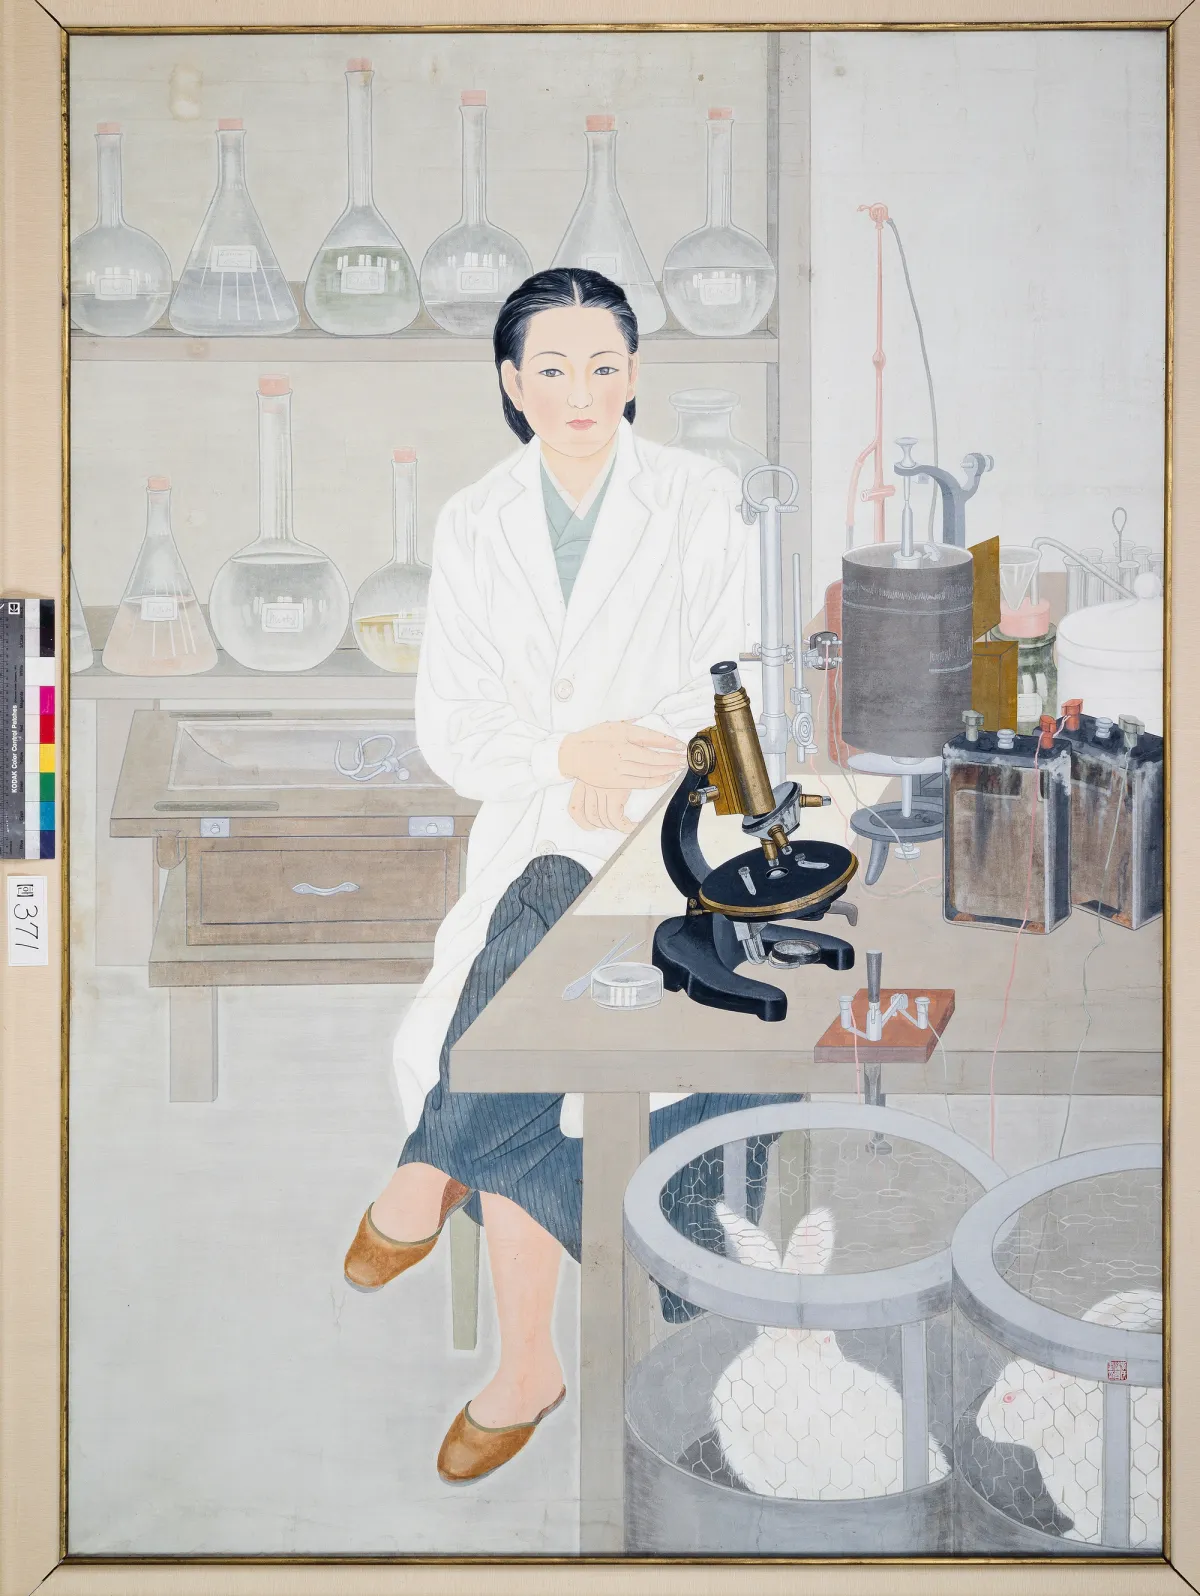 An drawing of a scientist sitting at a laboratory table, surrounded by chemistry equipment.